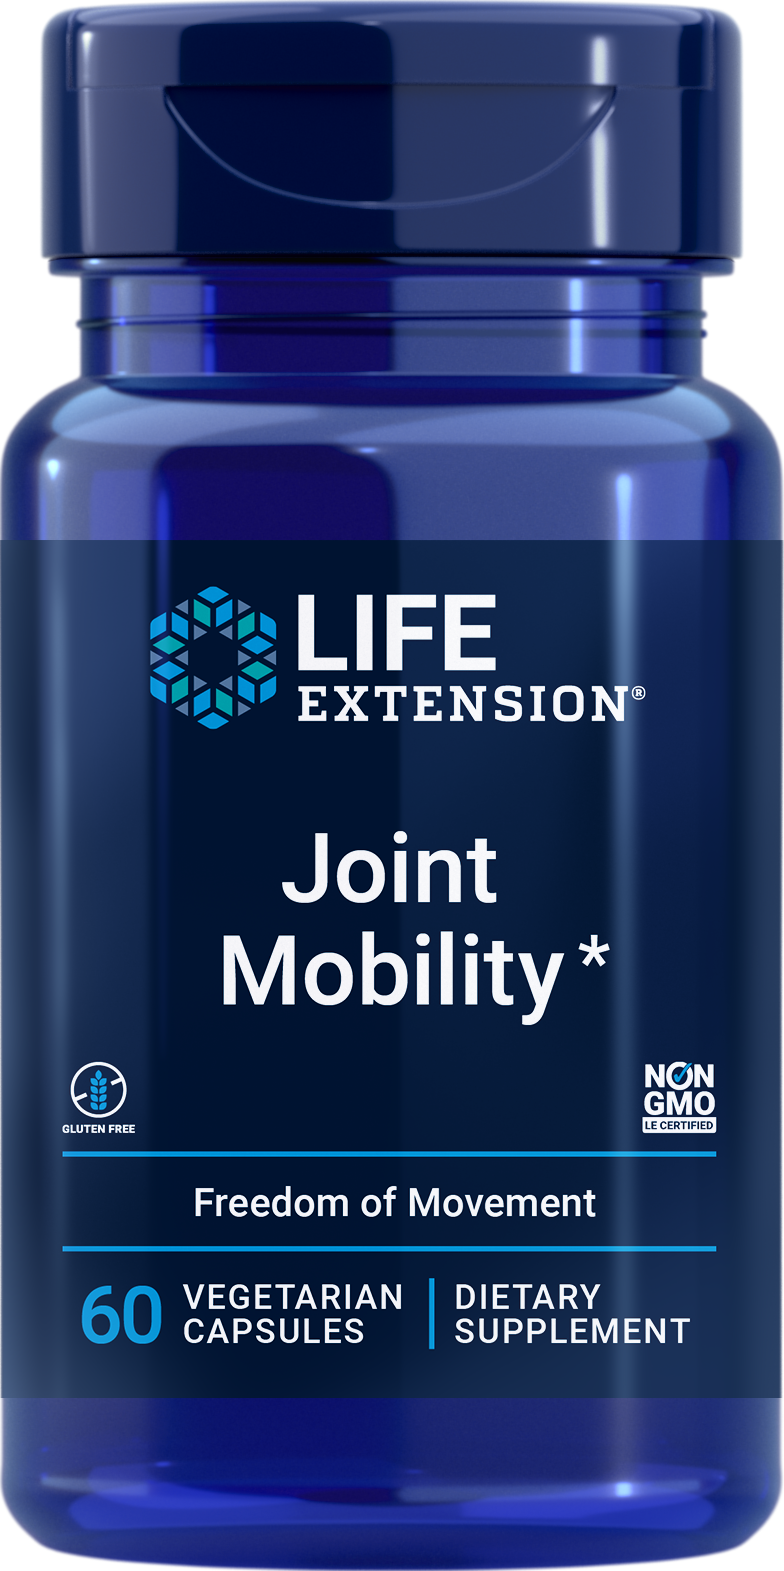 Life Extension Joint Mobility, 60 vegetarian capsules for inhibiting inflammation to support joint mobility and comfort